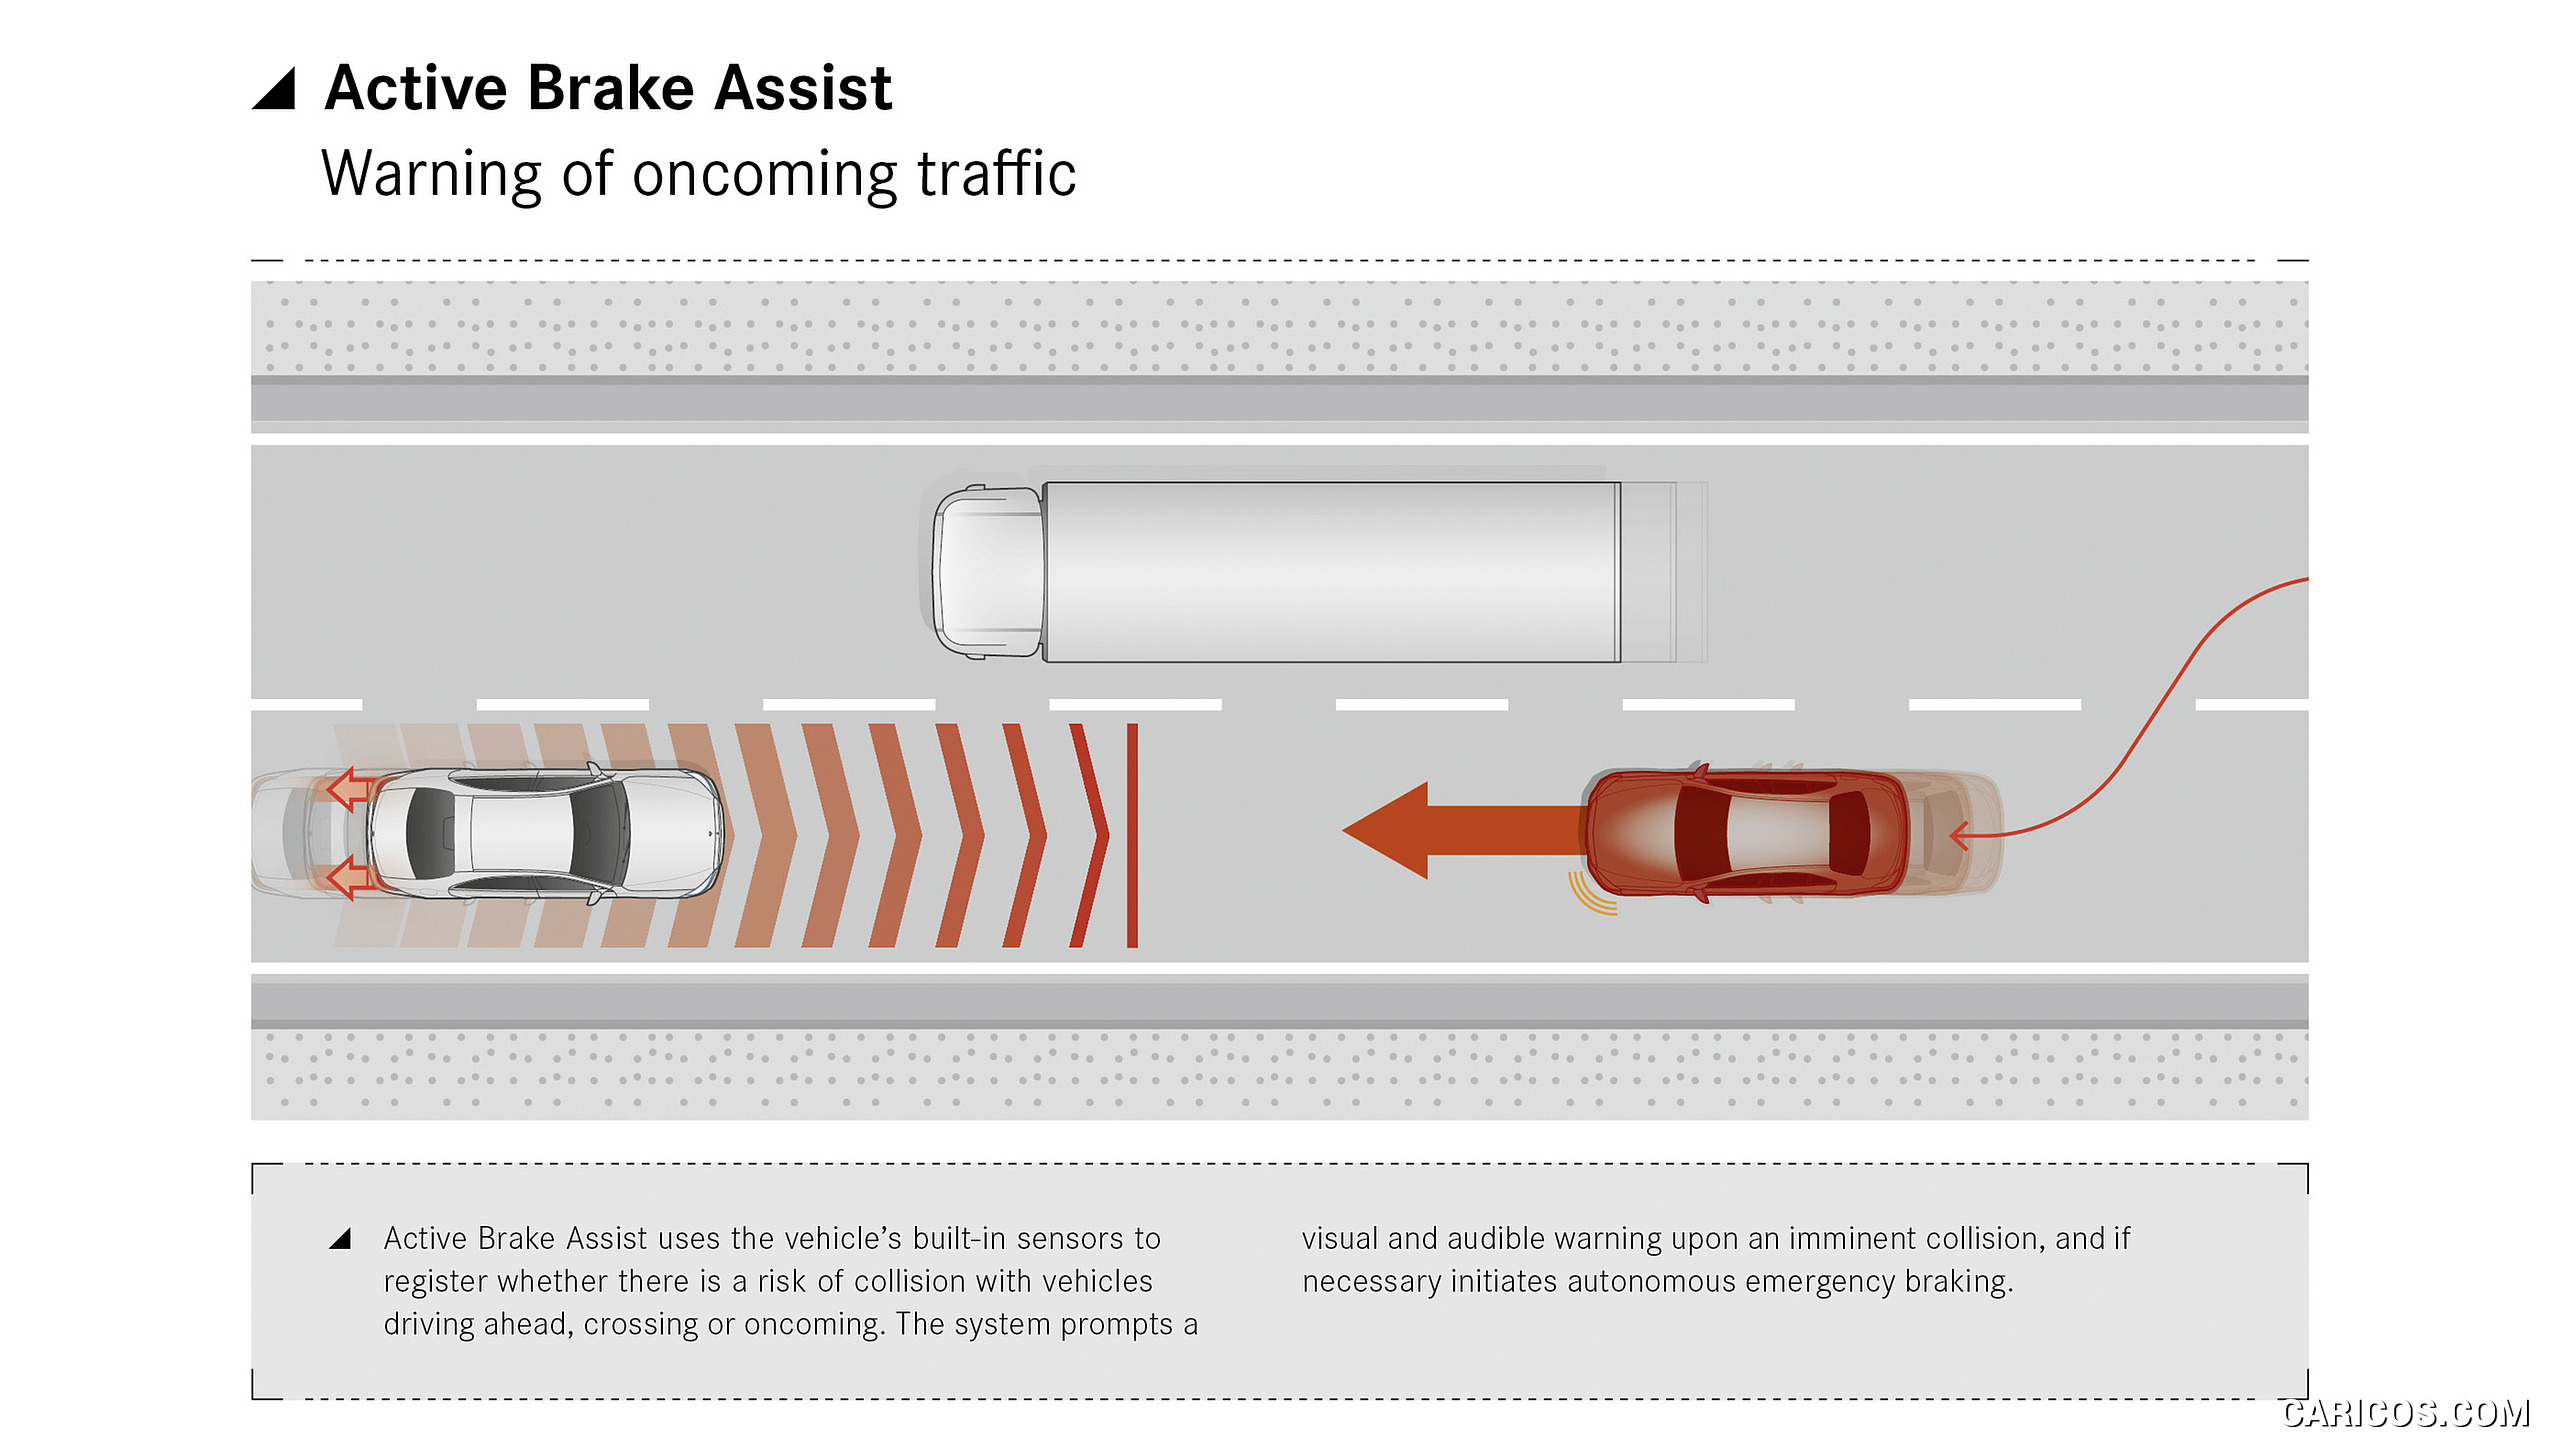 2021 Mercedes-Benz S-Class - Driving assistance system: Active Brake Assist with warning of oncoming traffic, #197 of 316